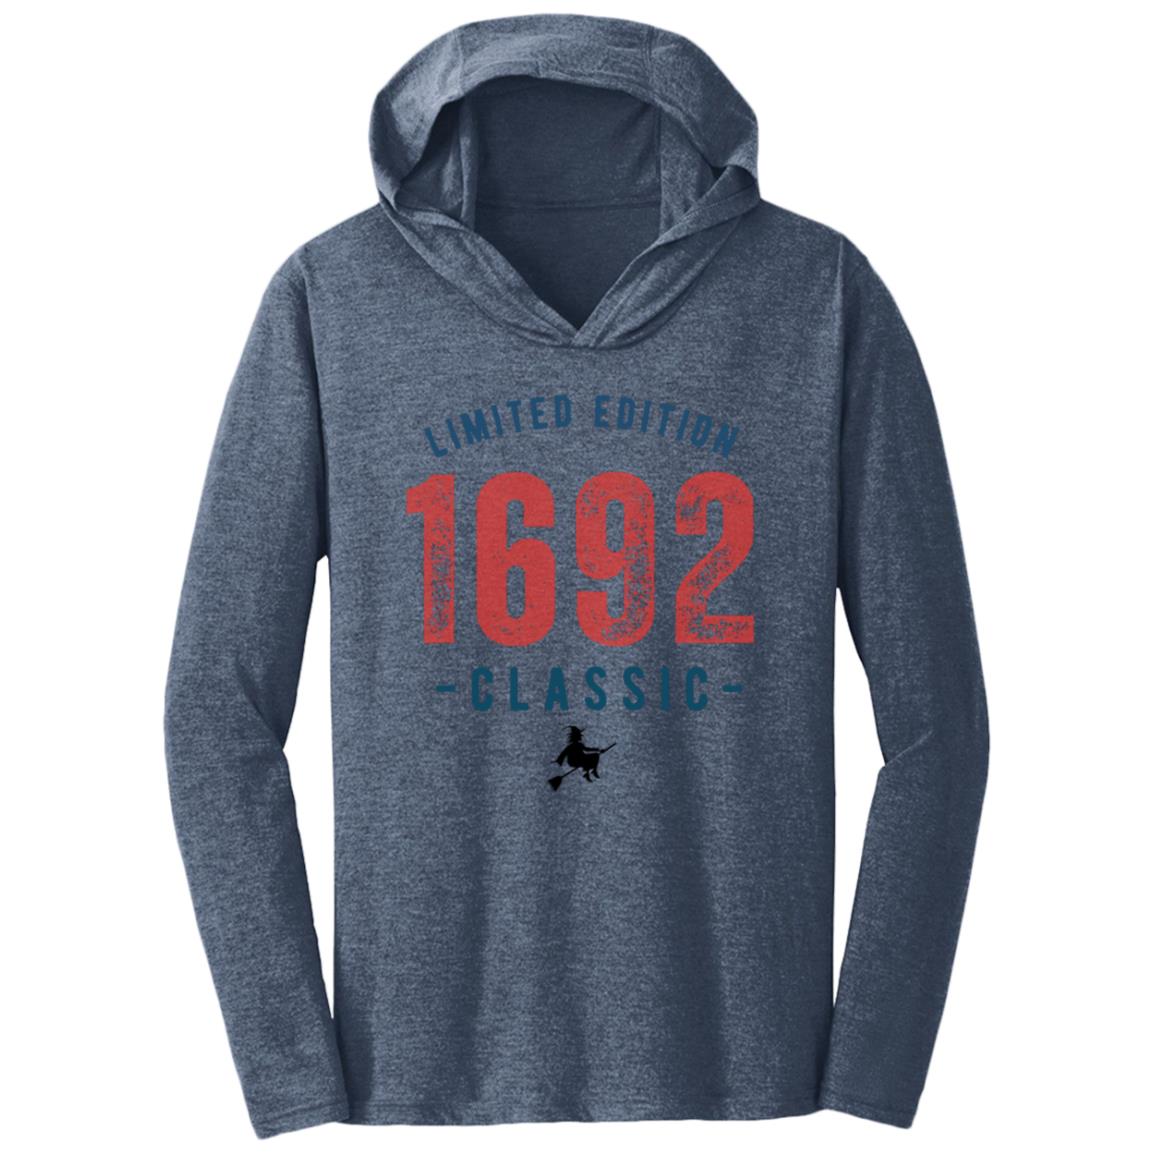 Limited Edition 1692 Classic Witch T Shirt 1692 Limited Edition Triblend T-Shirt Hoodie